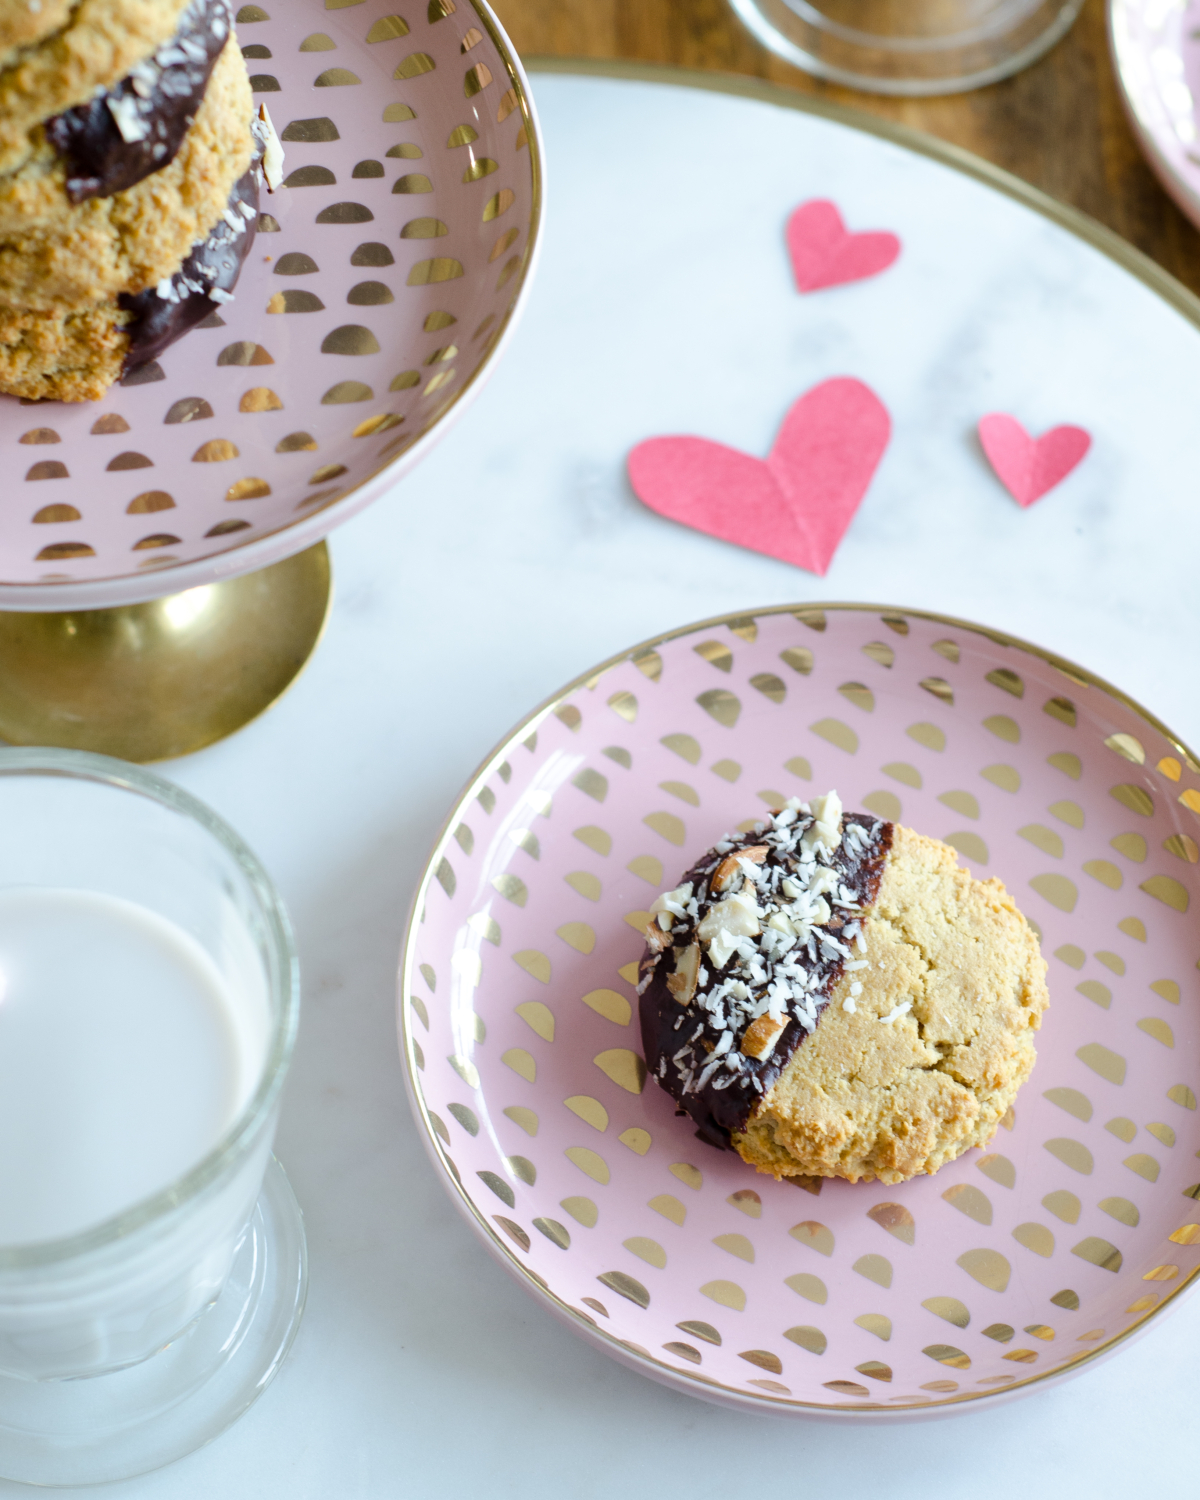 A paleo cookie recipe so delicious you'll forget you're eating healthy! Almond, coconut, and chocolate cookies for those looking for a healthy cookie recipe or just a little something sweet and tasty!